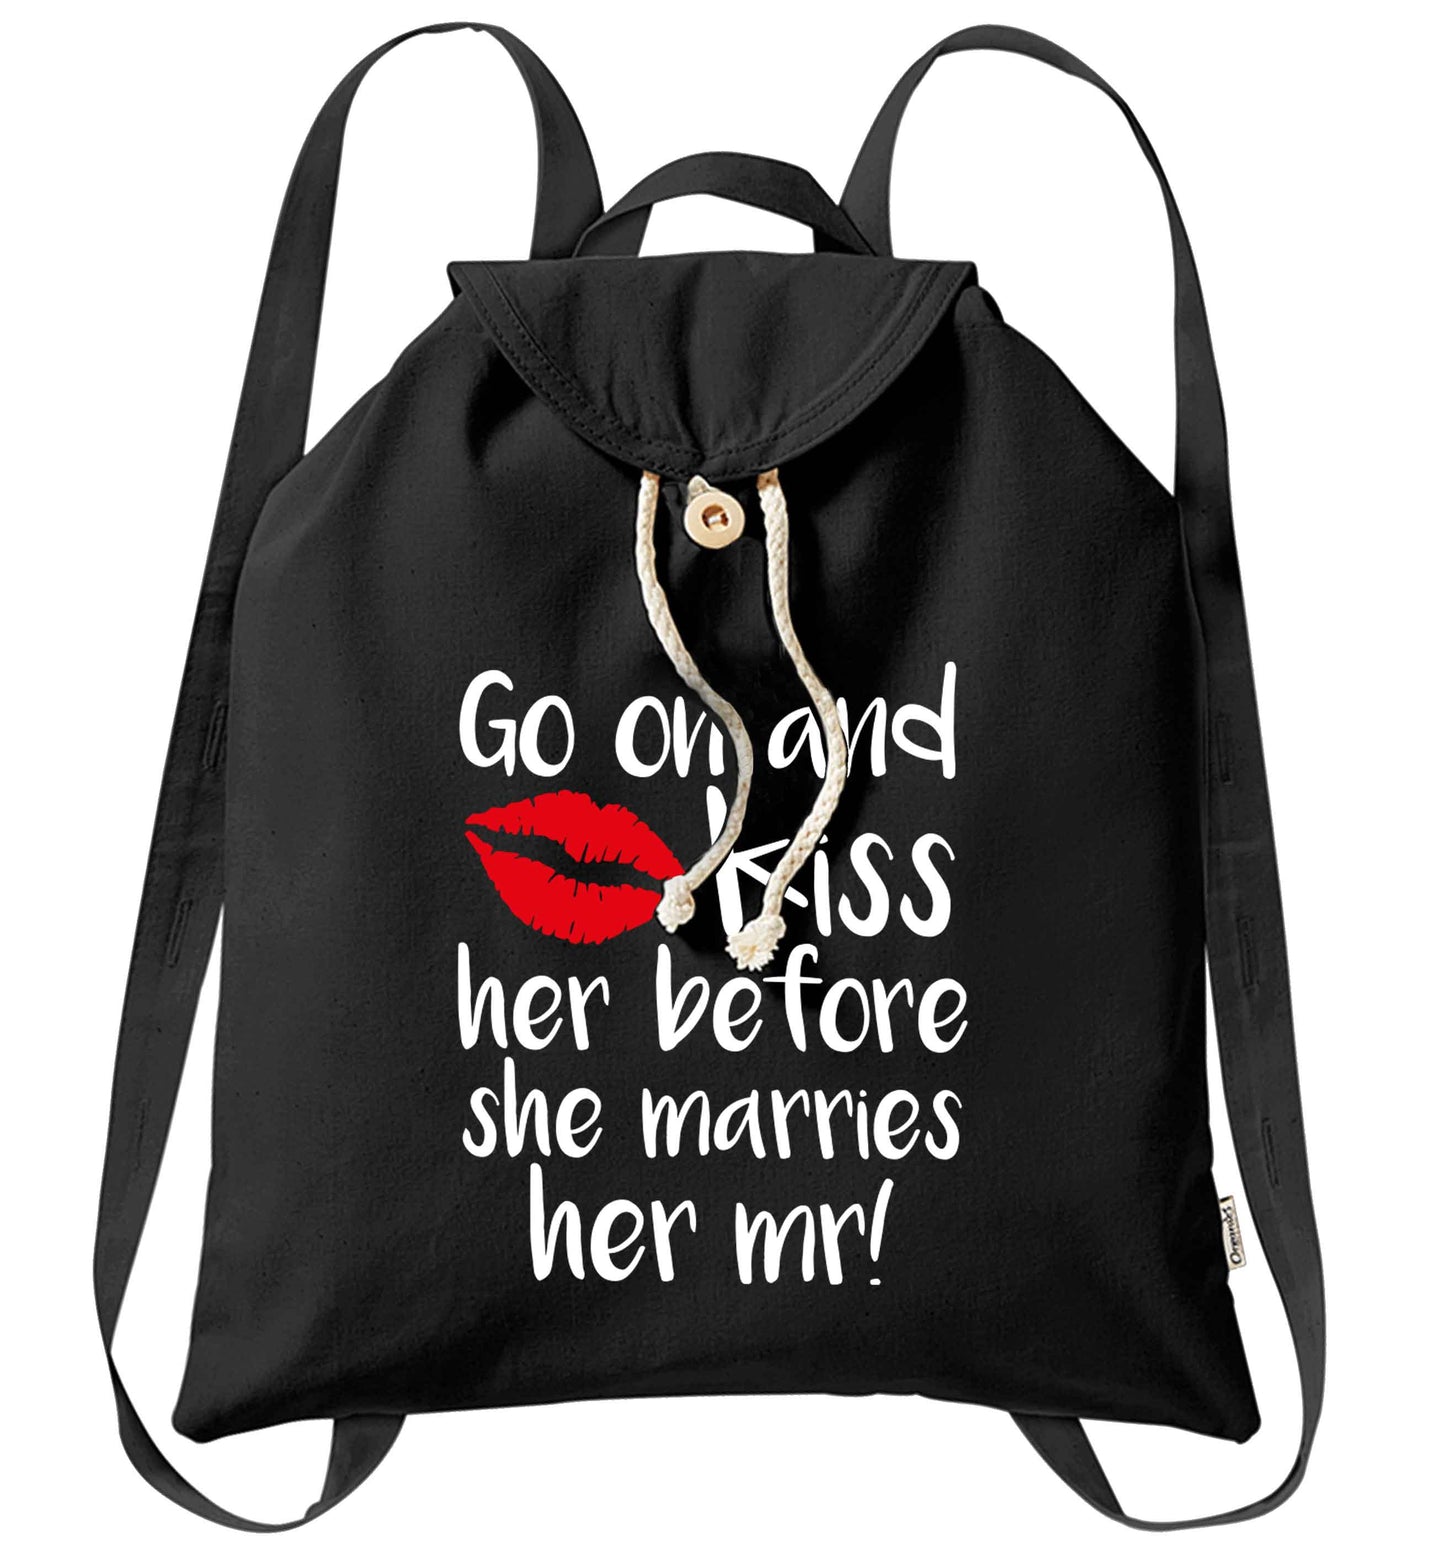 Kiss her before she marries her mr! organic cotton backpack tote with wooden buttons in black